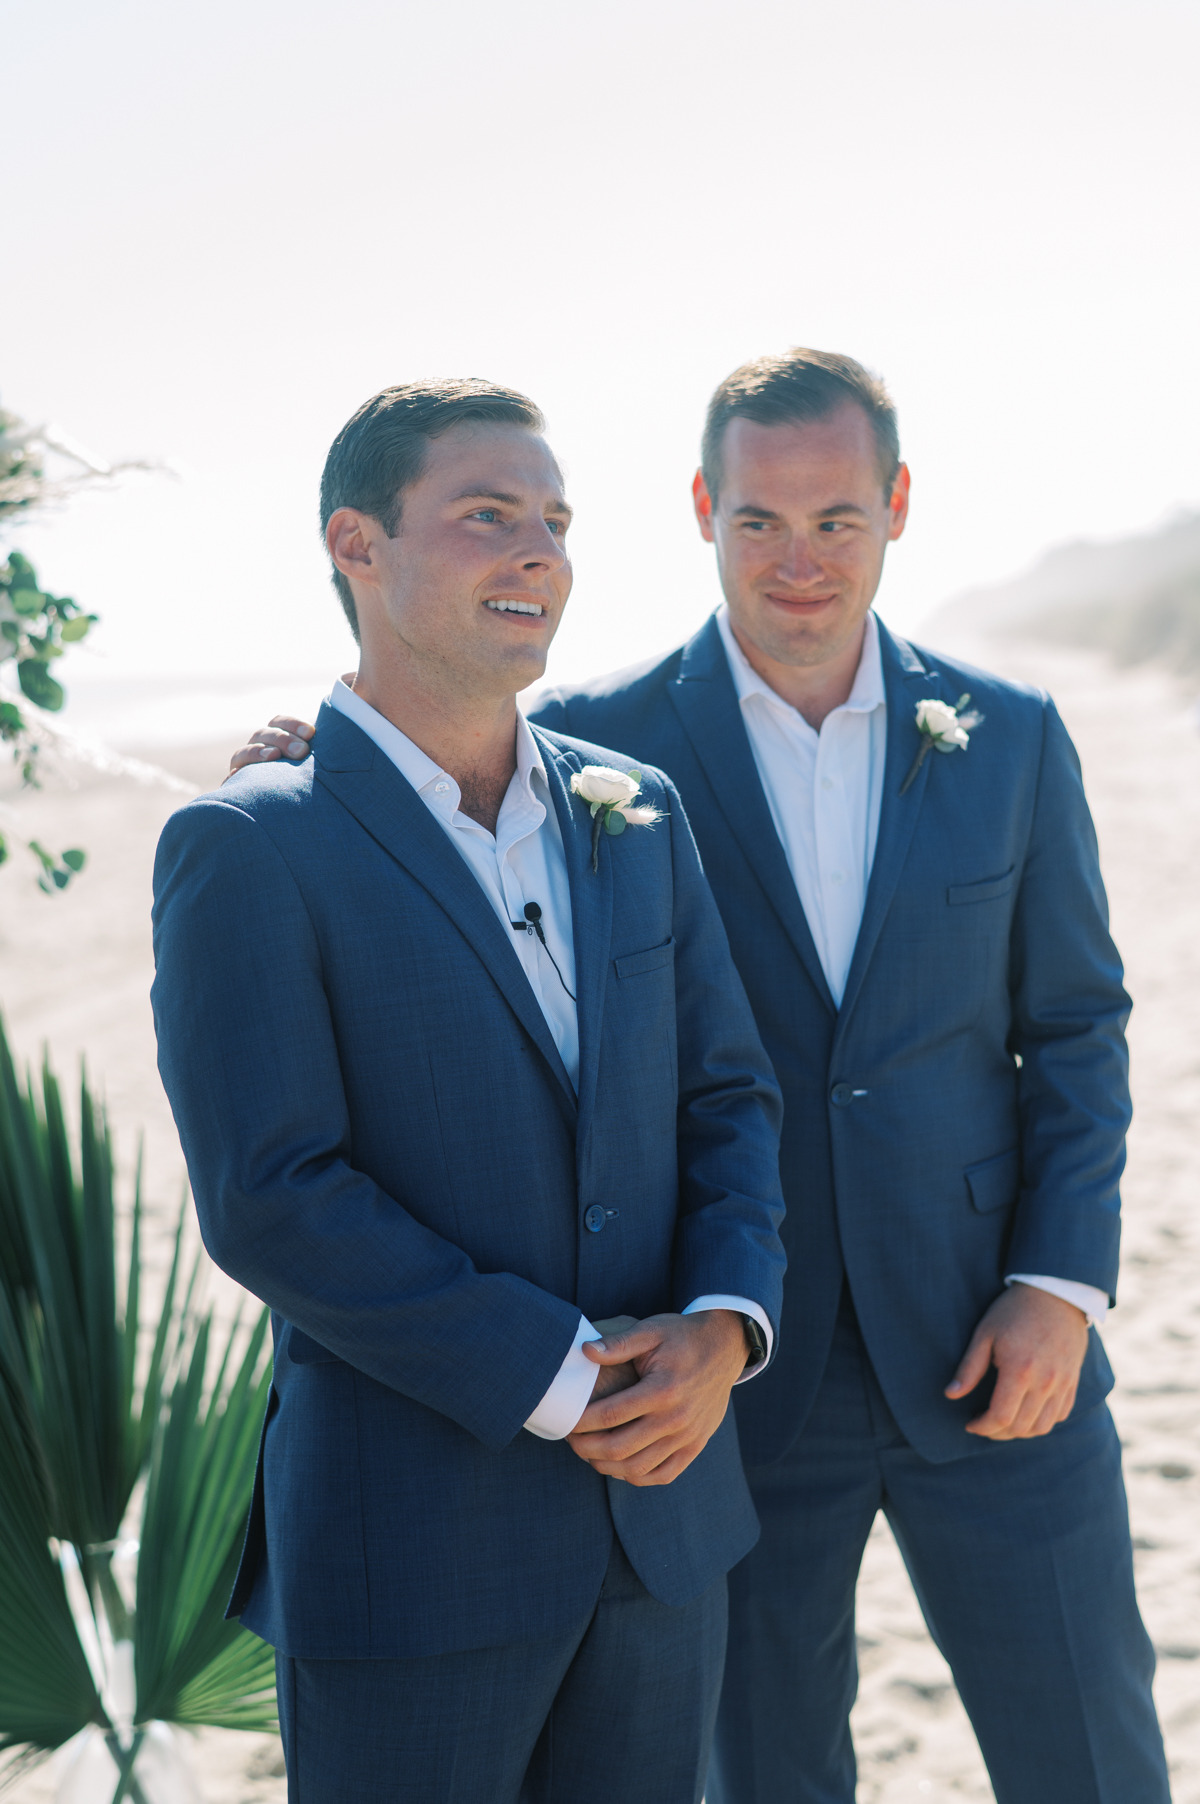 Groom and best man at altar in blue suits